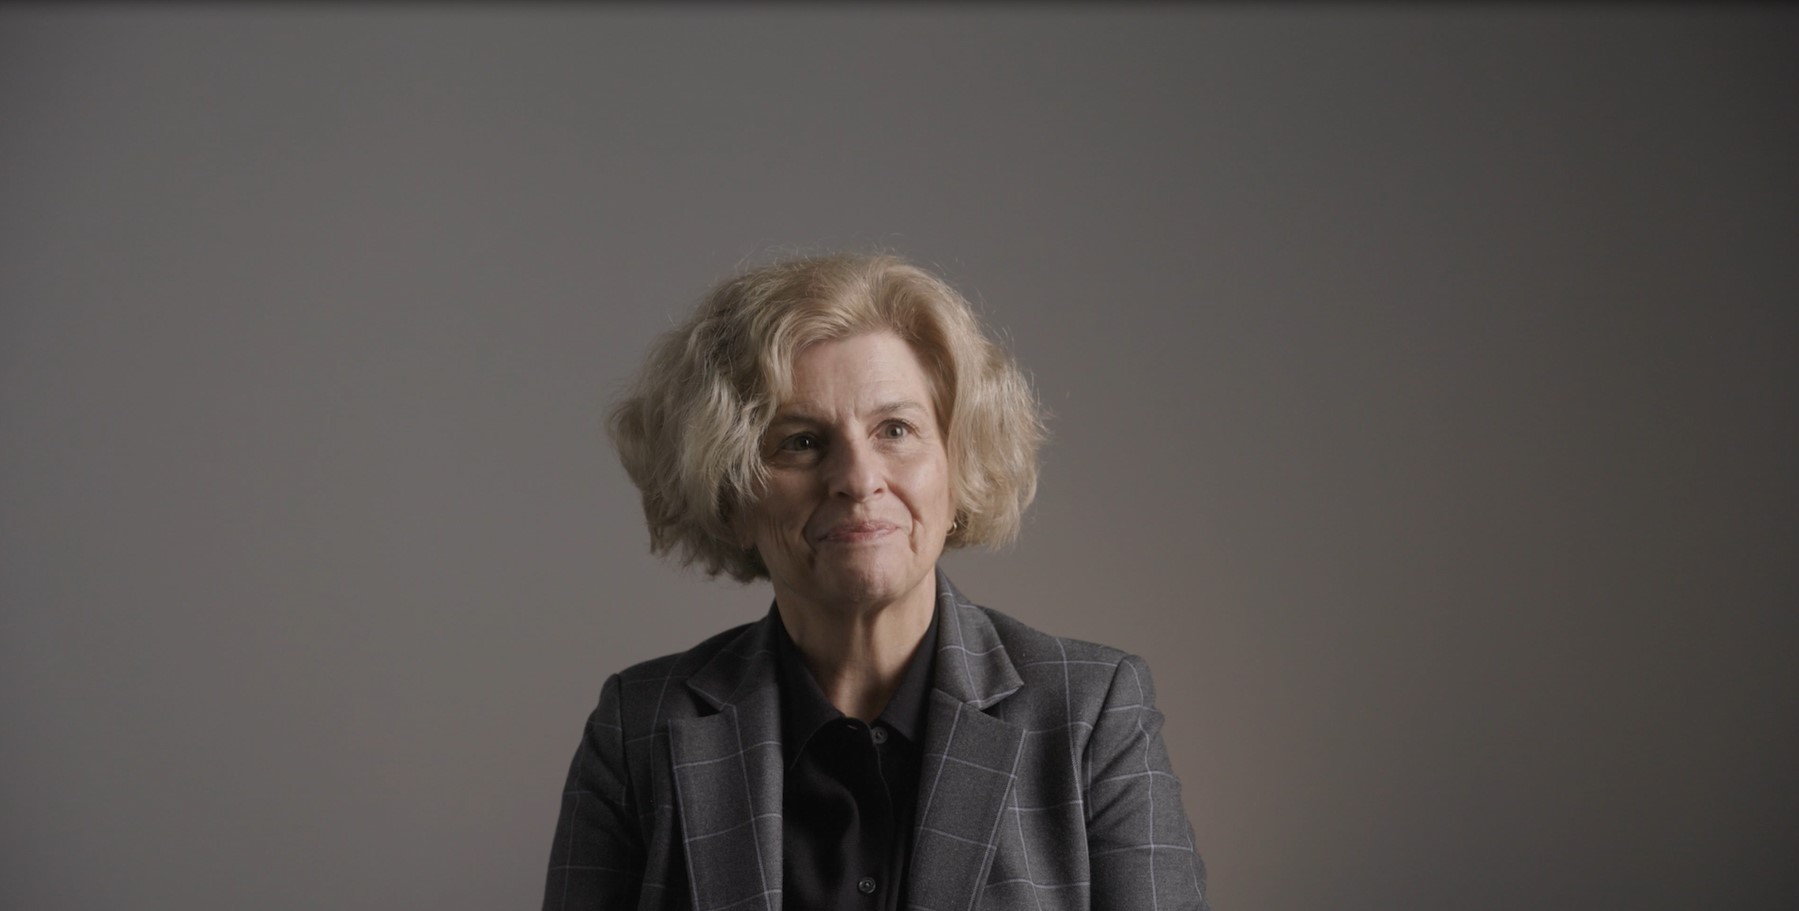 A woman with short blond hair wearing a gray blazer looks at the camera in front of a gray backdrop.